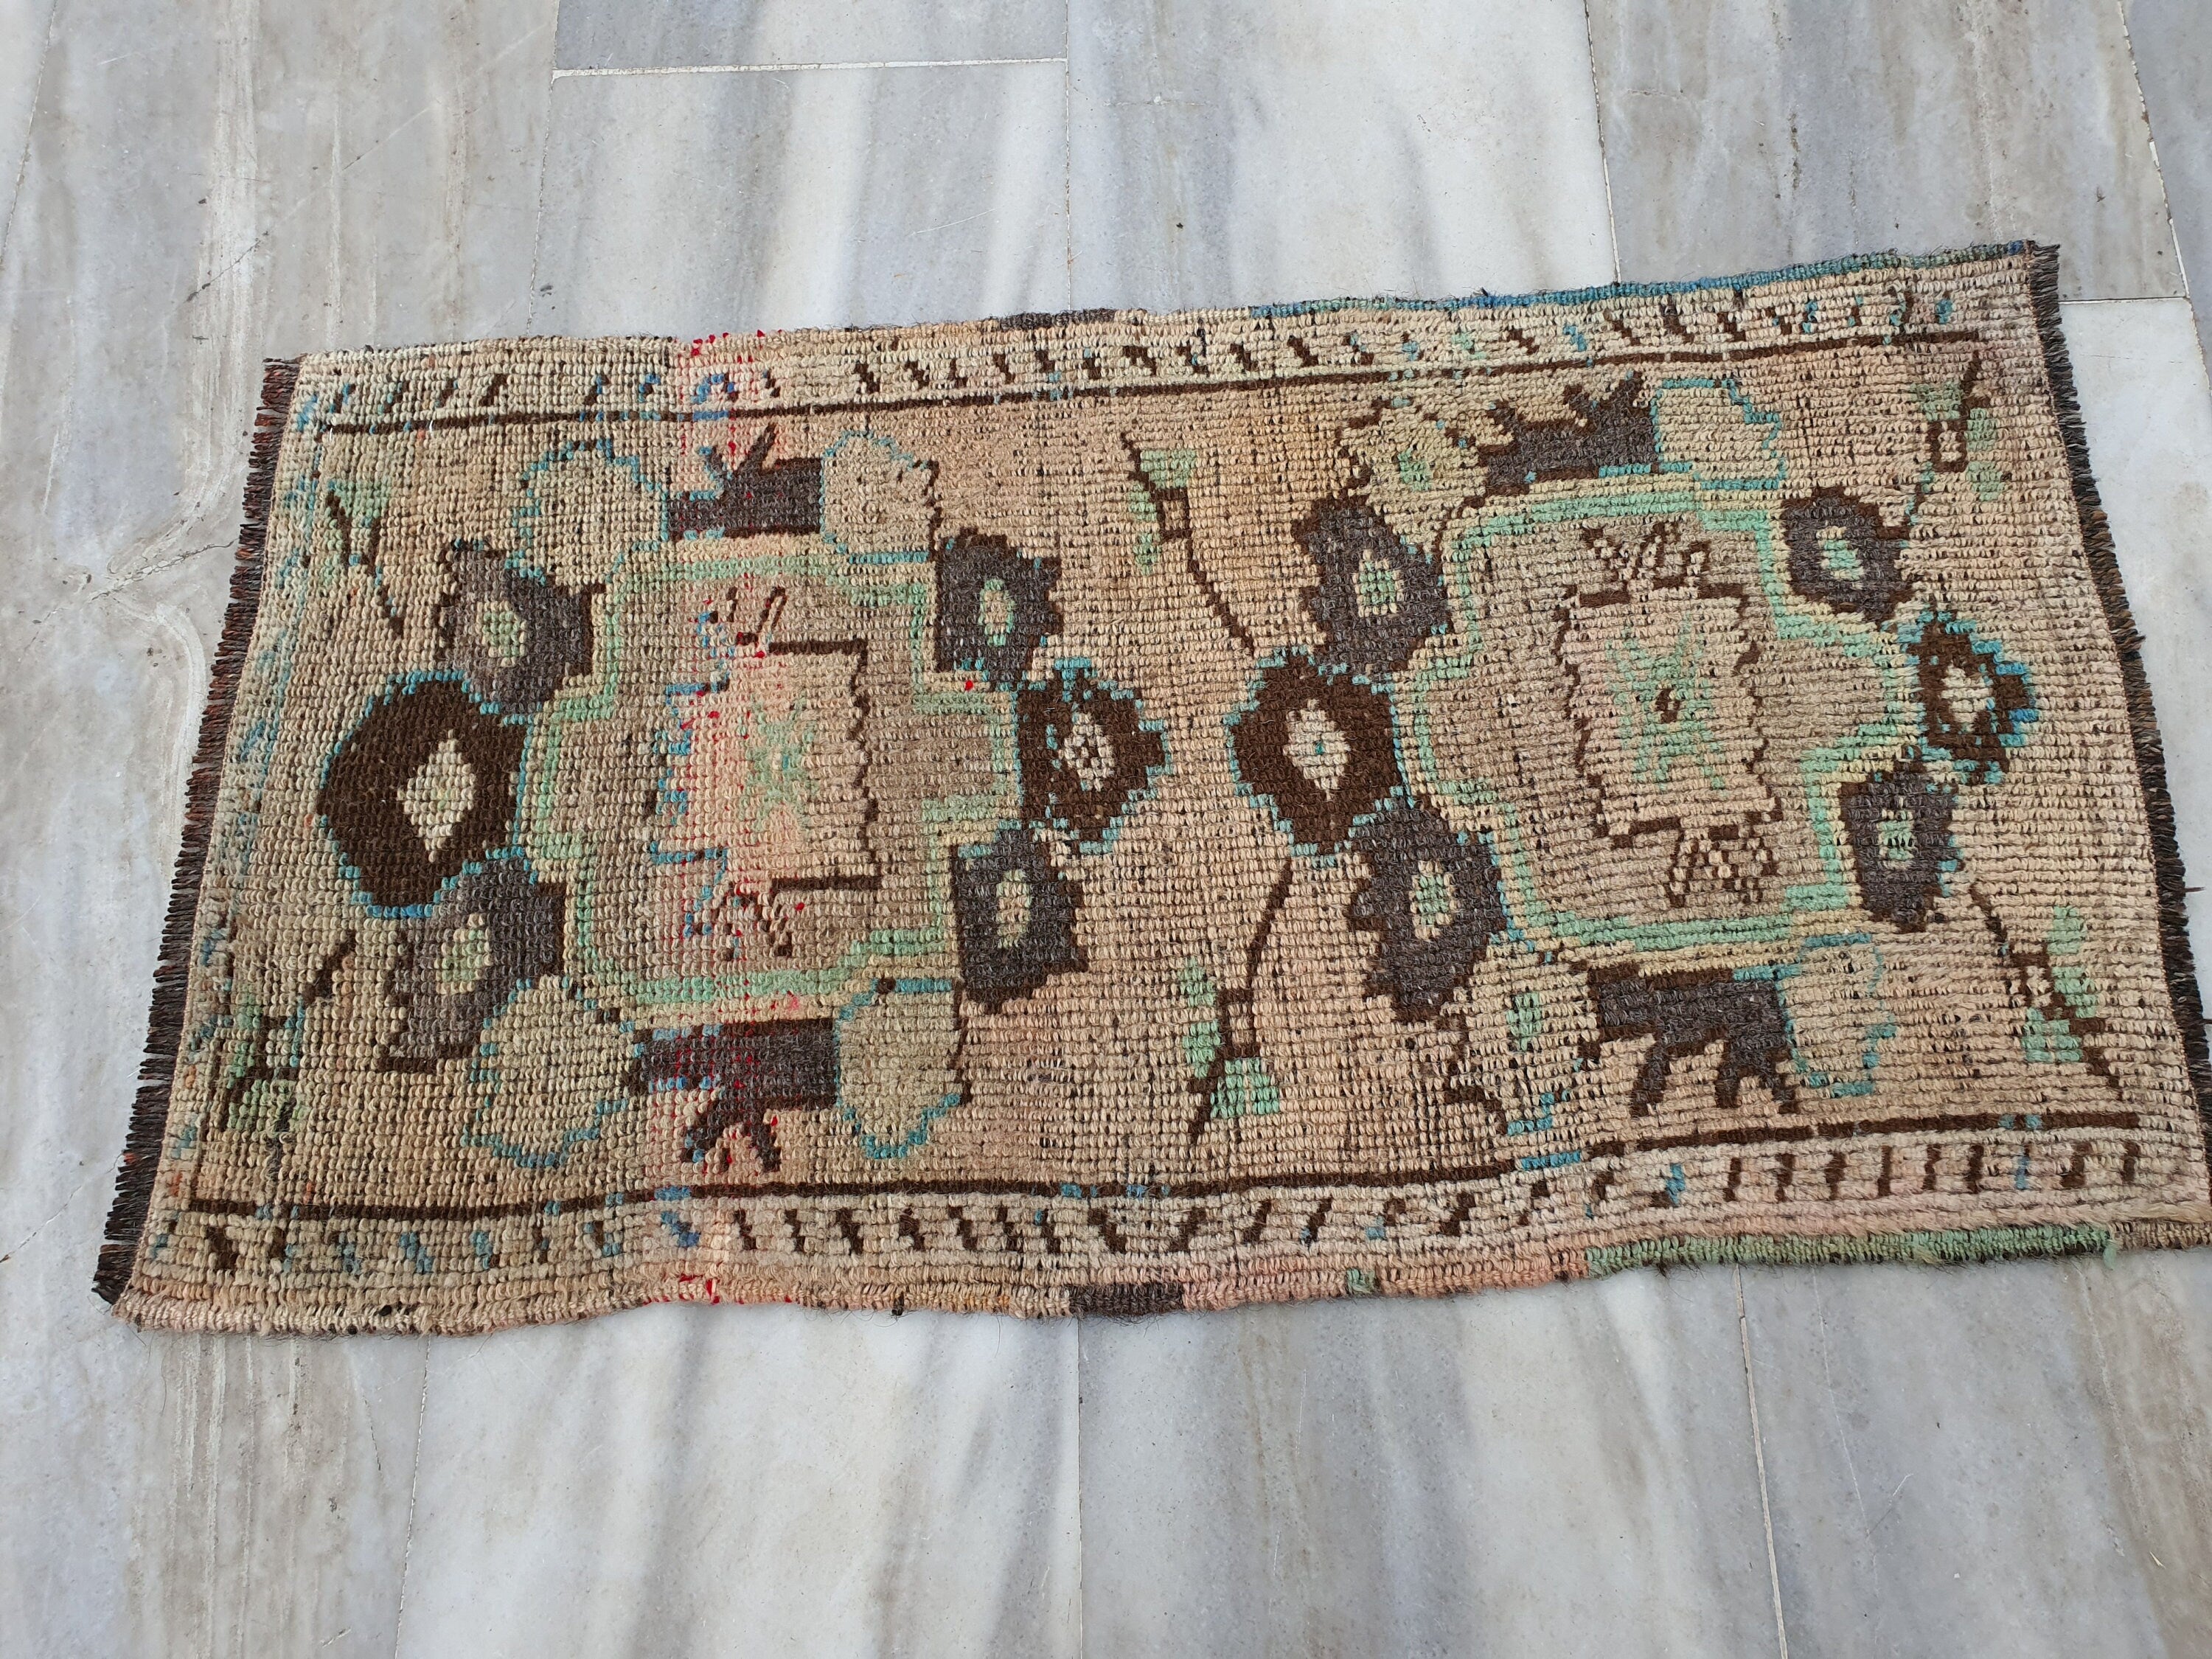 Small Turkish Rug, 3 ft 1 in x 1 ft 7 in, Apricot Orange and Teal Green / Grey Vintage Faded Distressed Door Mat